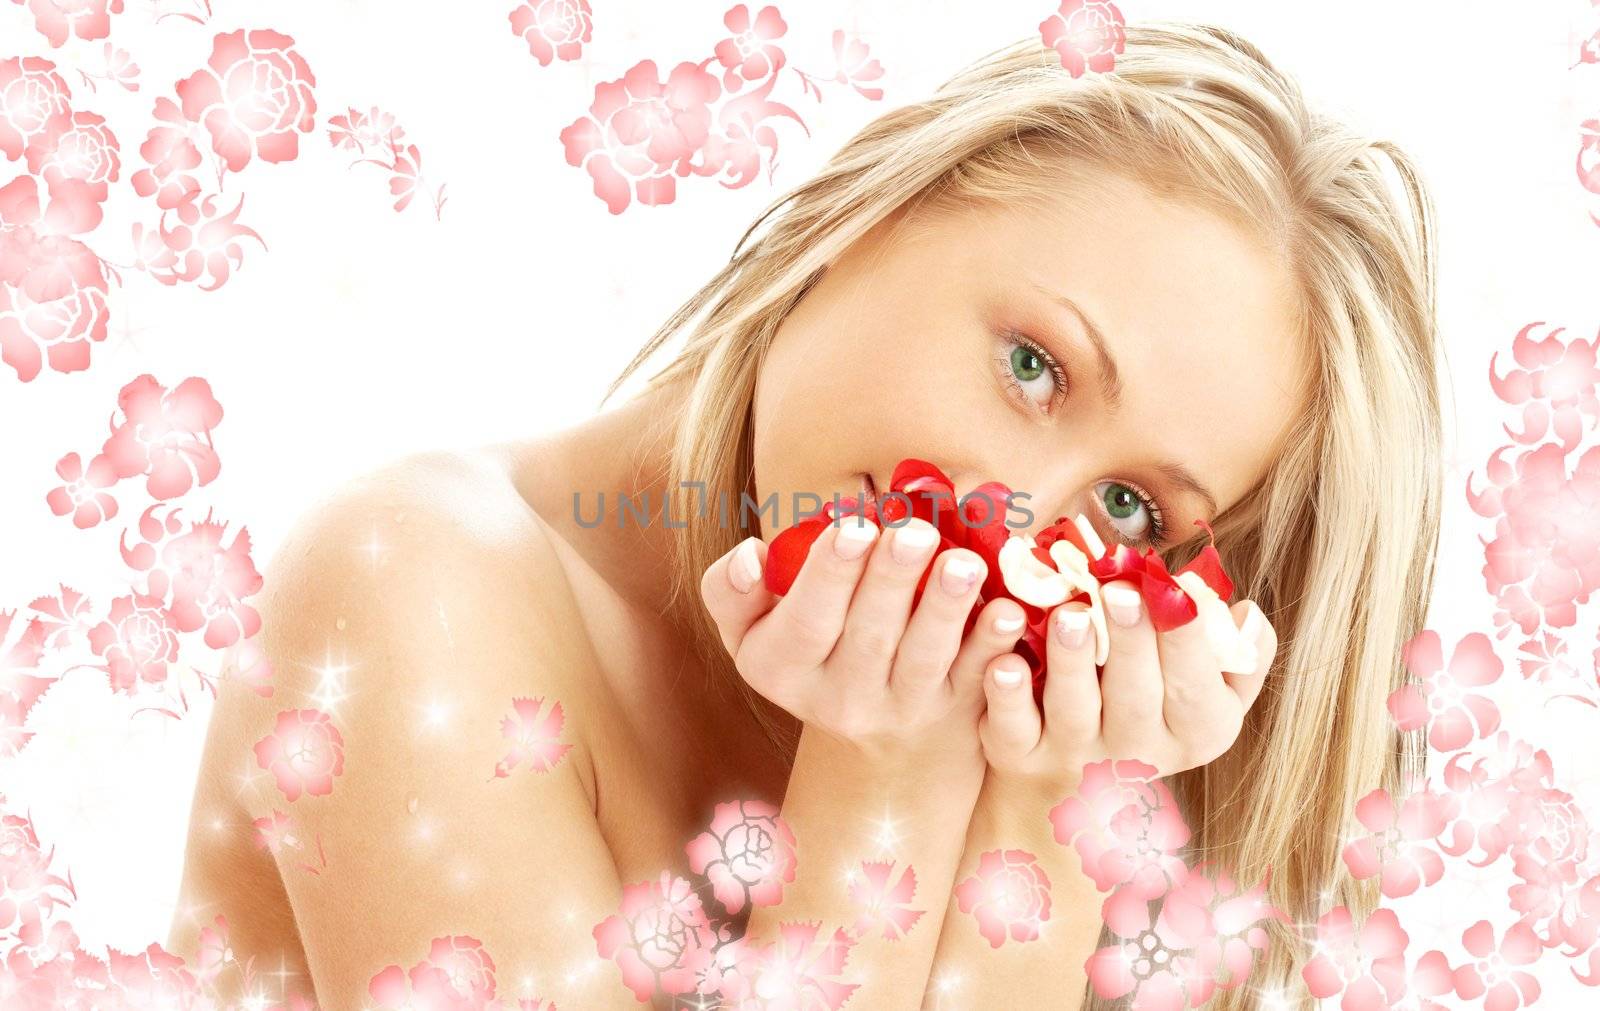 portrait of lovely blond with red and white rose petals and rendered flowers